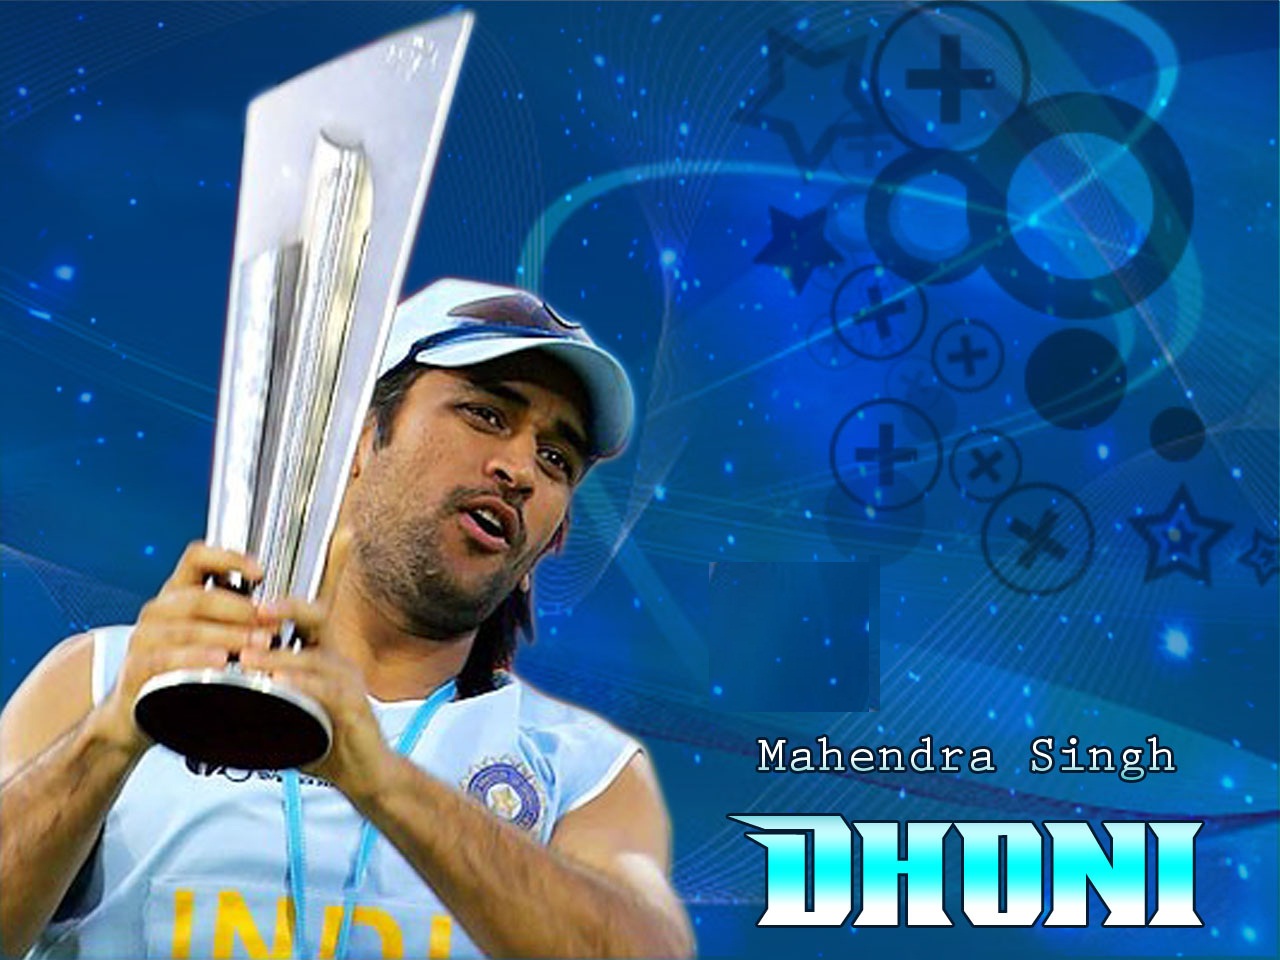 ms dhoni hd wallpapers,photography,music artist,world,competition event,selfie